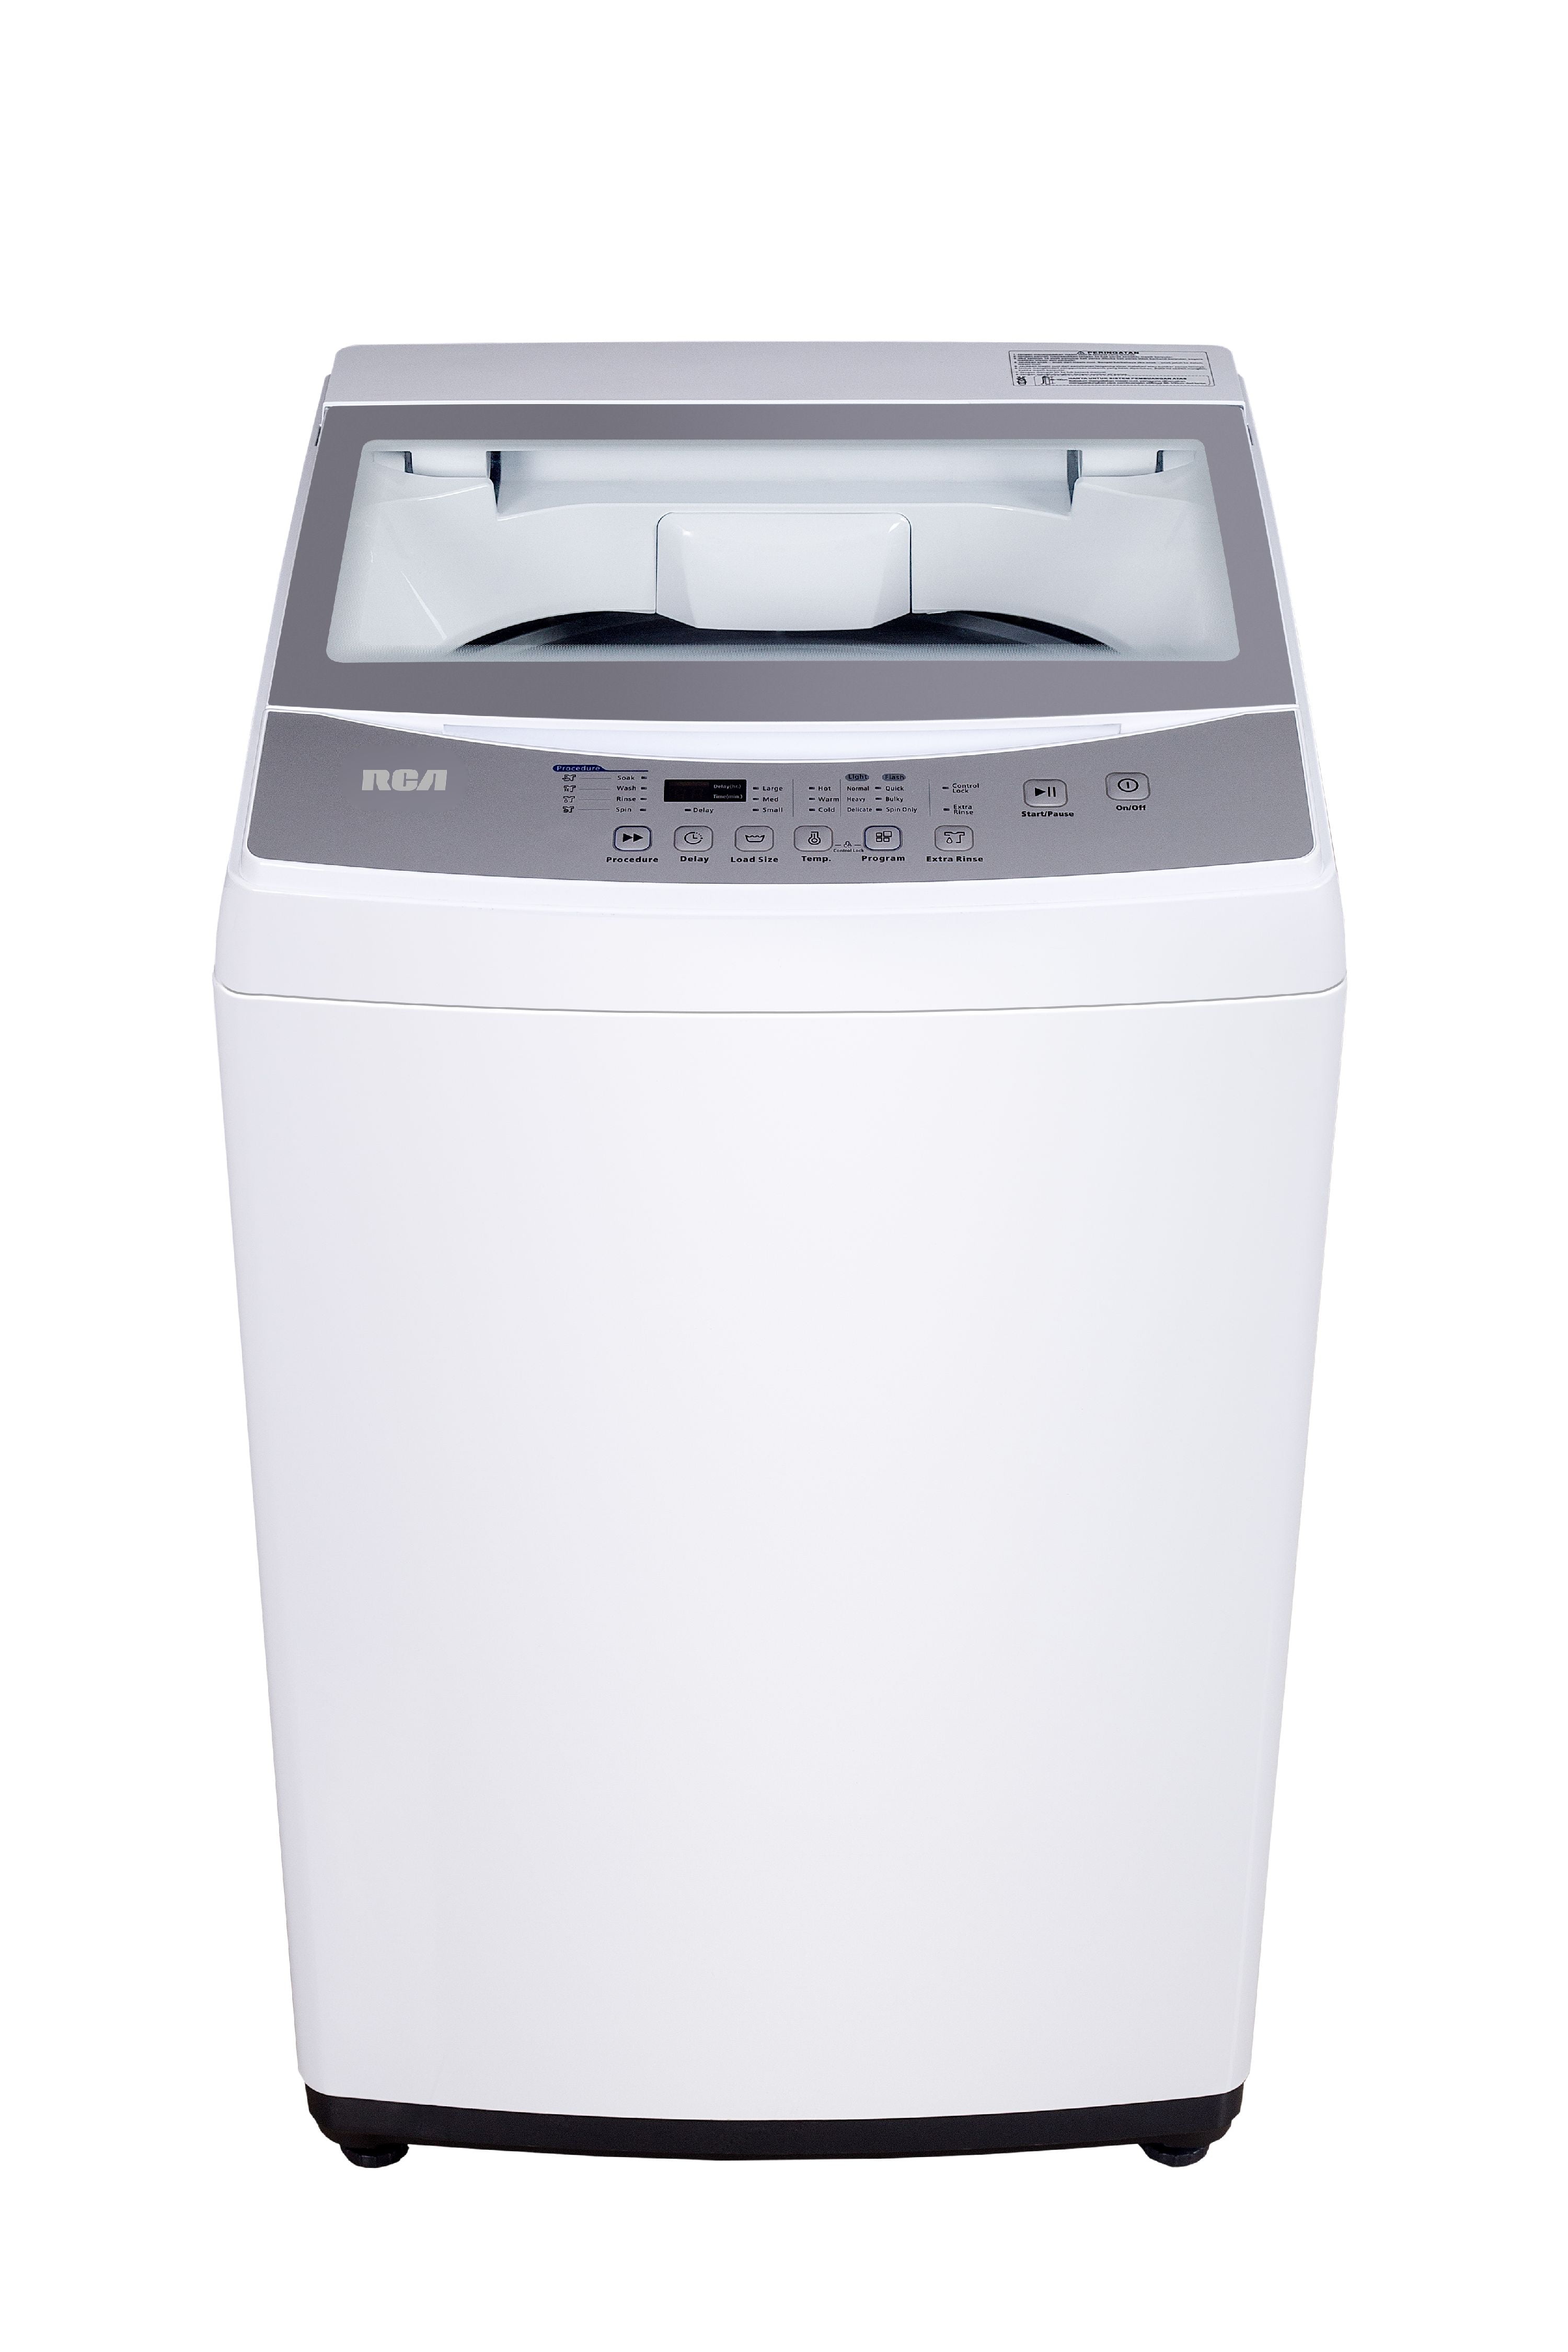 RCA 3.0 Cu. Ft. Portable Washer RPW302 